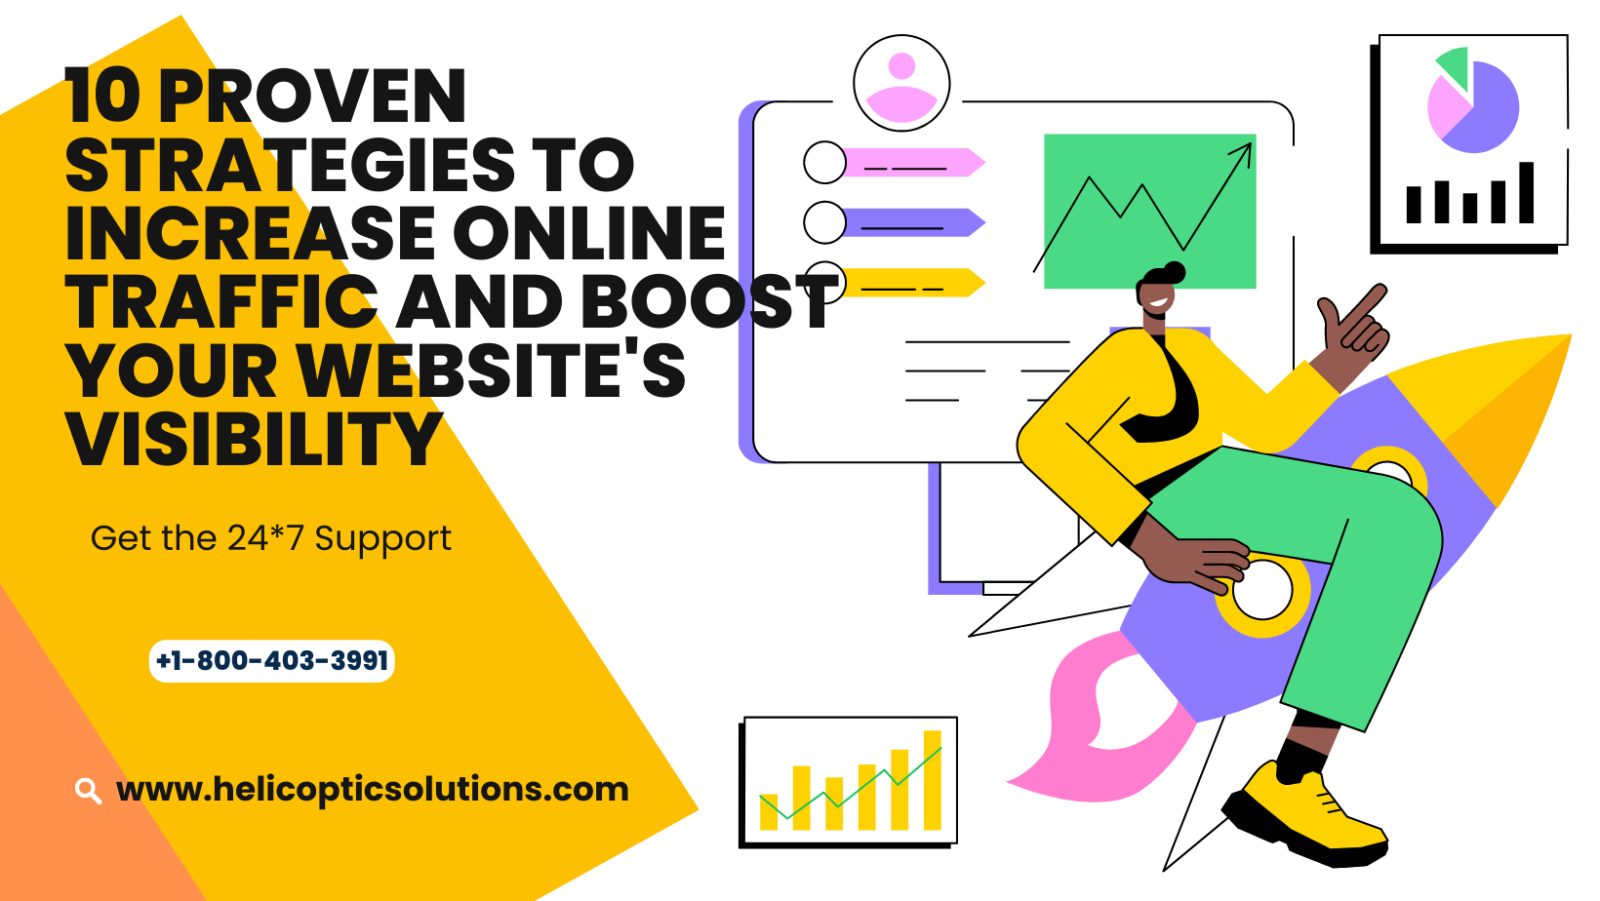 10 Proven Strategies to Increase Online Traffic and Boost Your Website's Visibility